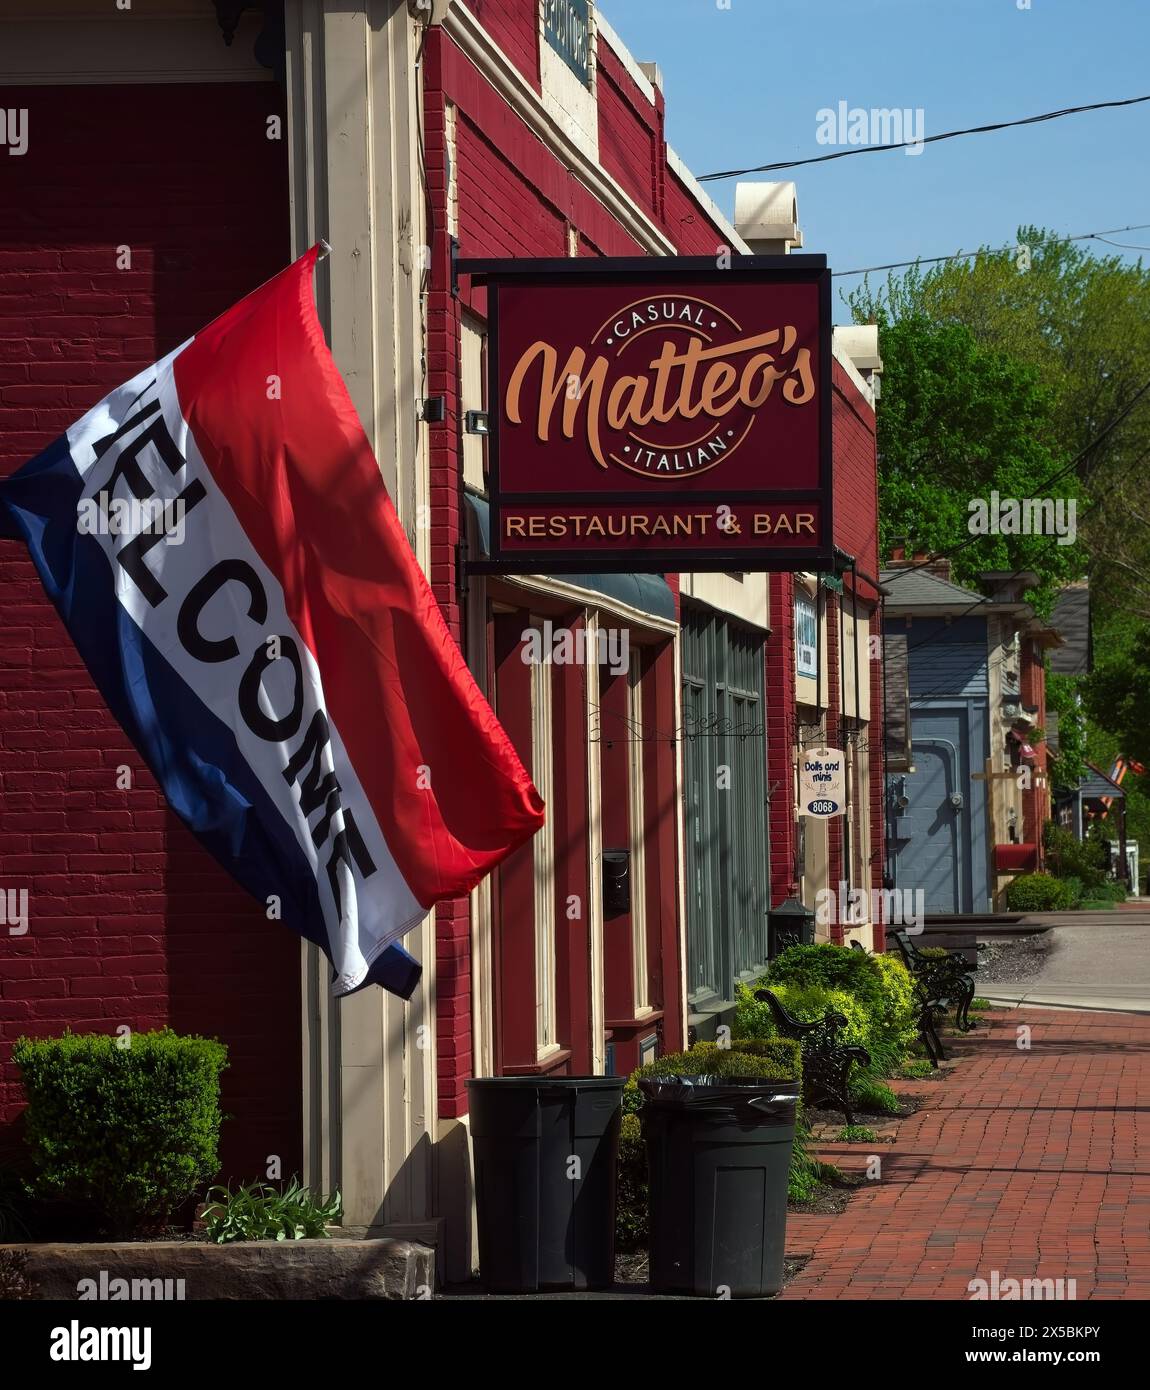 Matteo's Italian Restaurant anchors a block of quaint shops and vintage facades in this tiny but charming southwestern suburb of Cleveland. Stock Photo